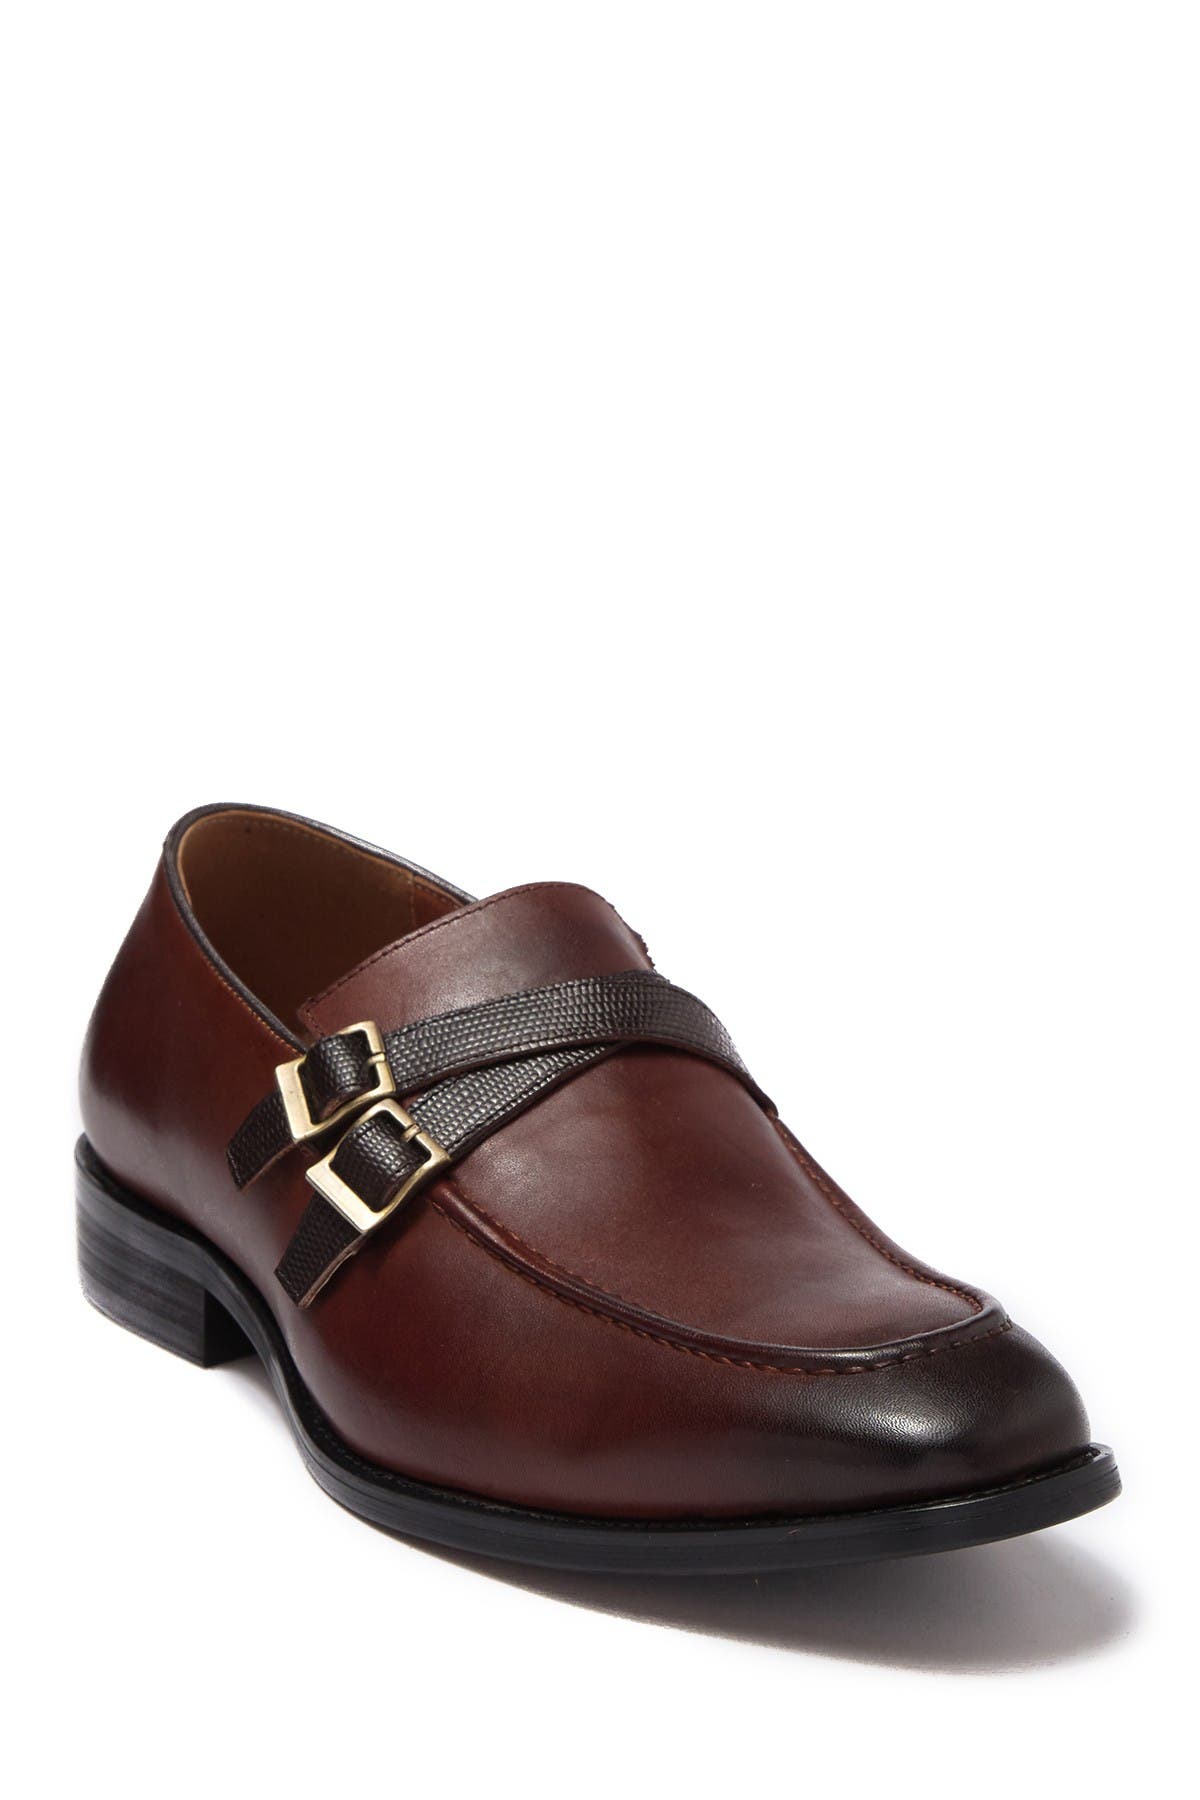 giovanni loafers